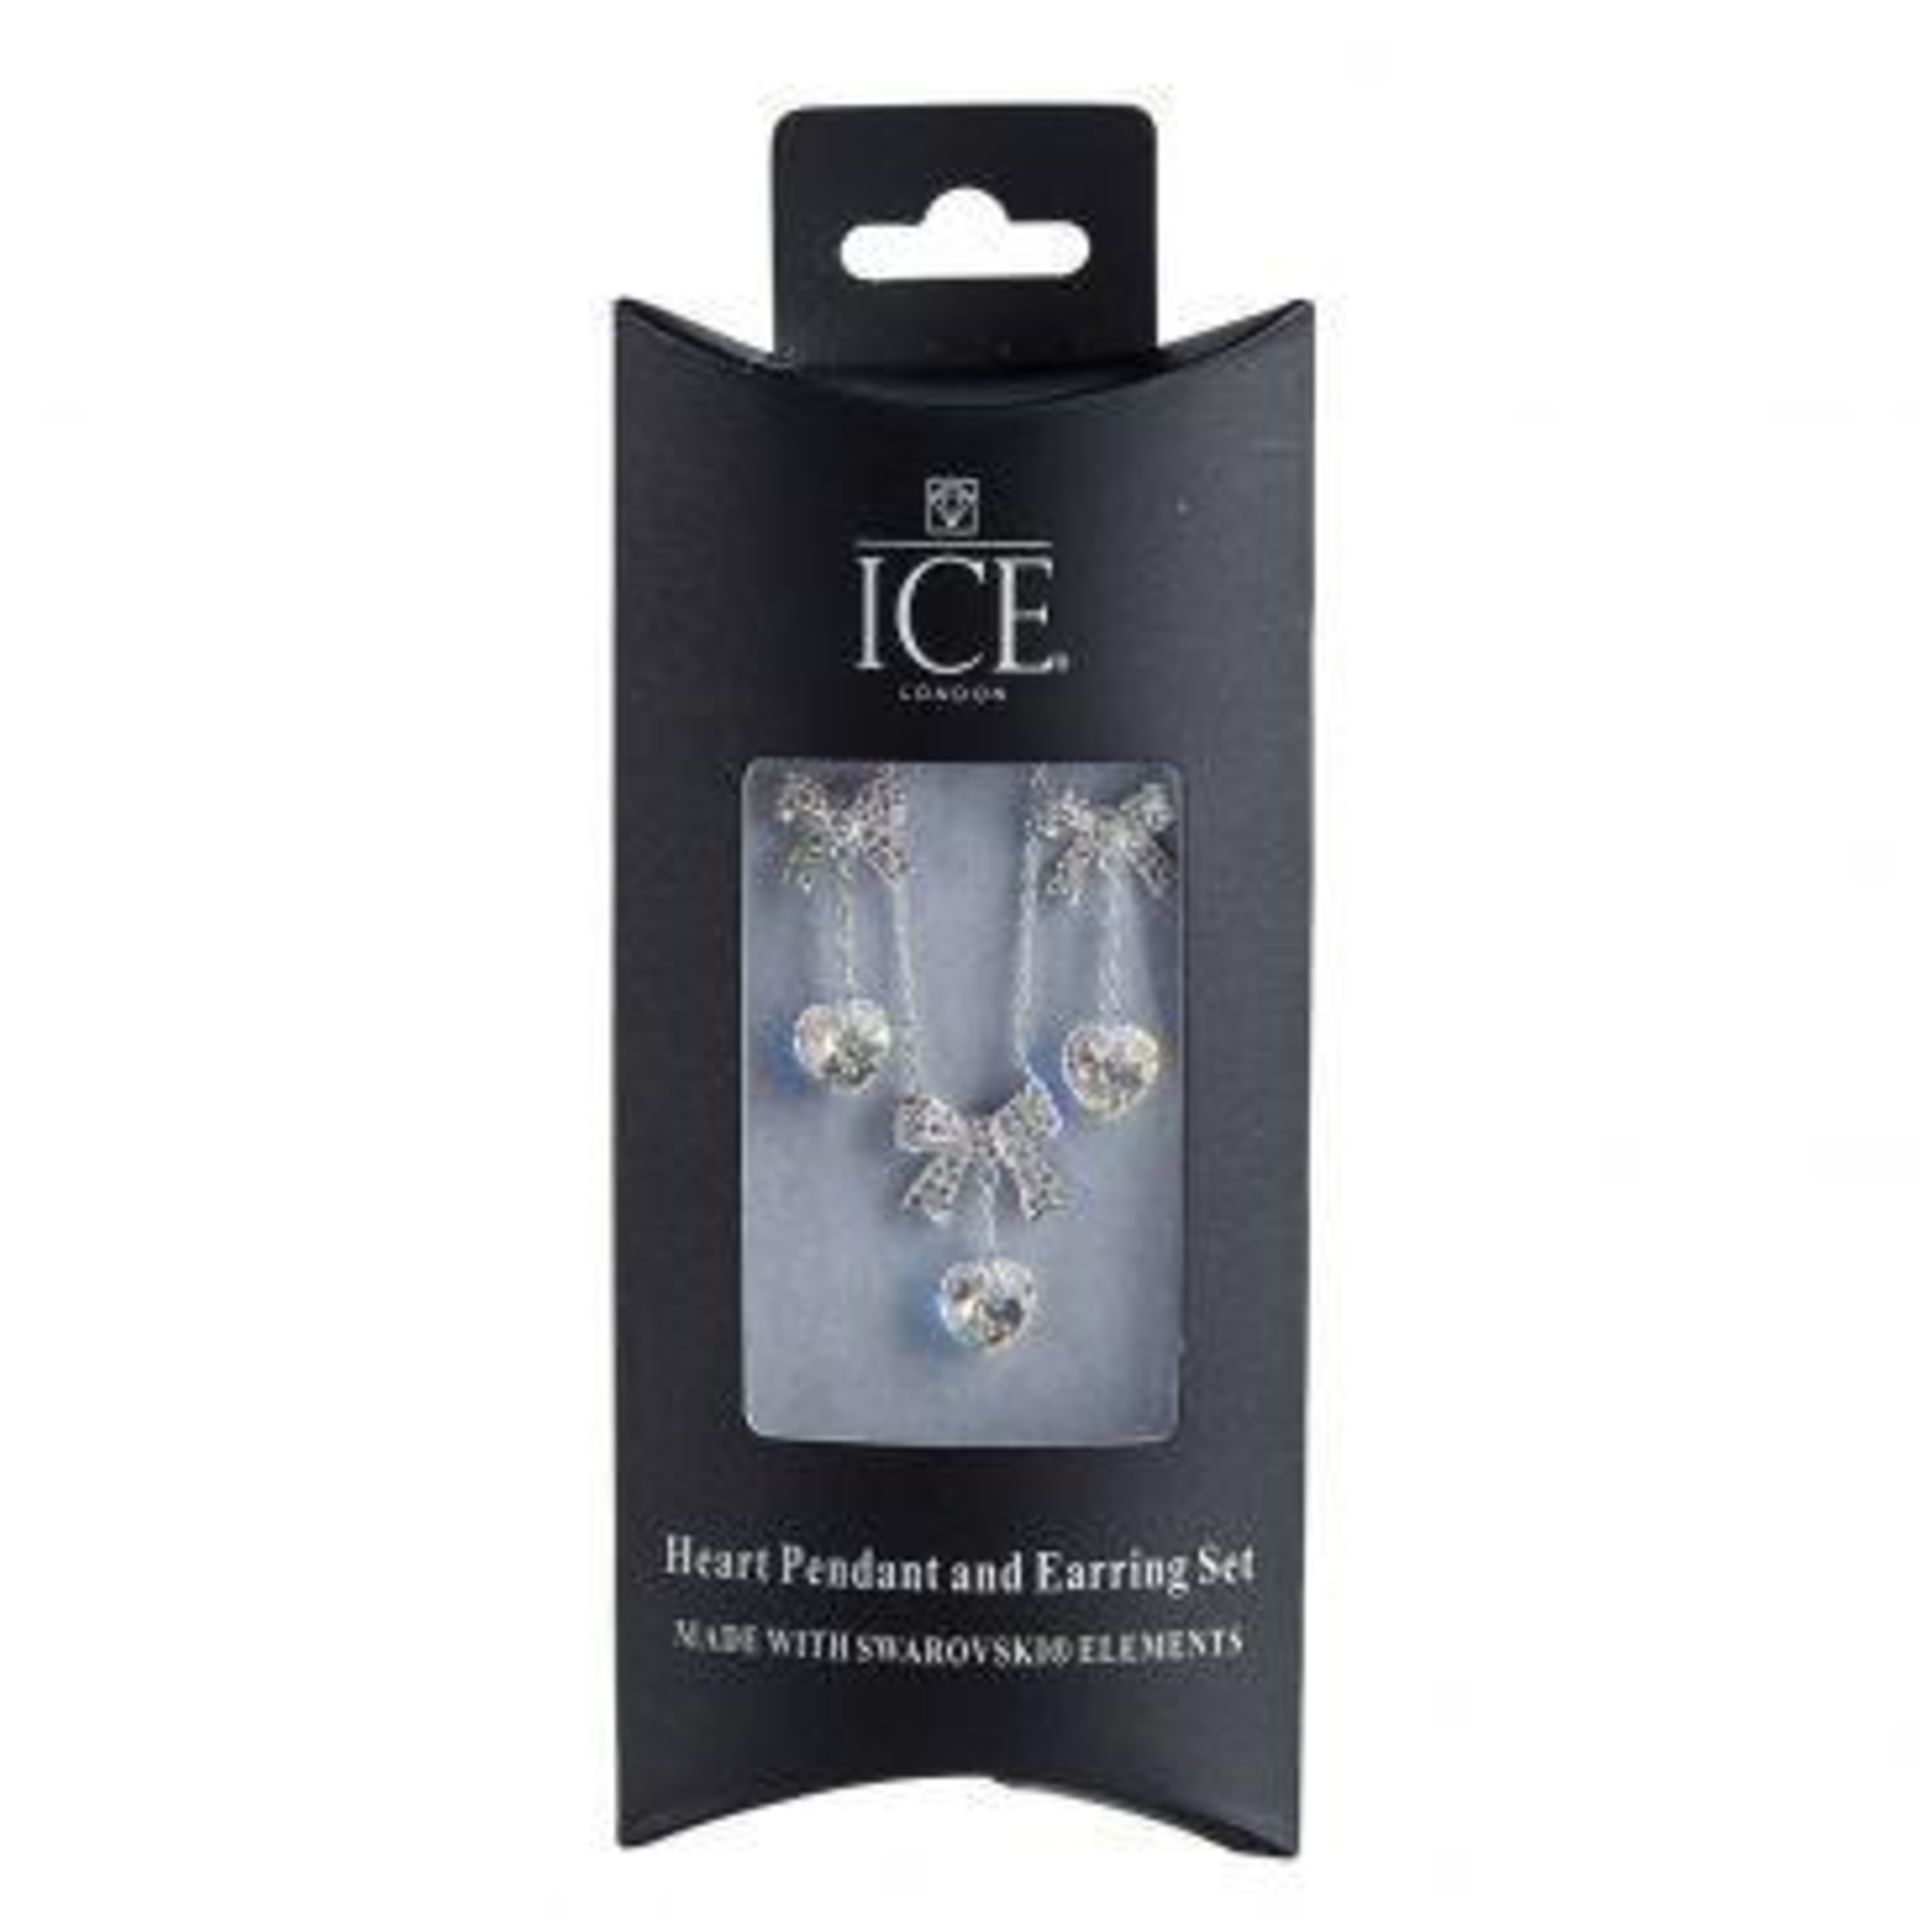 10 x HEART PENDANT AND EARRING SETS By ICE London - EGJ-9900 - Silver-tone Curb Chain Adorned With - Image 3 of 3